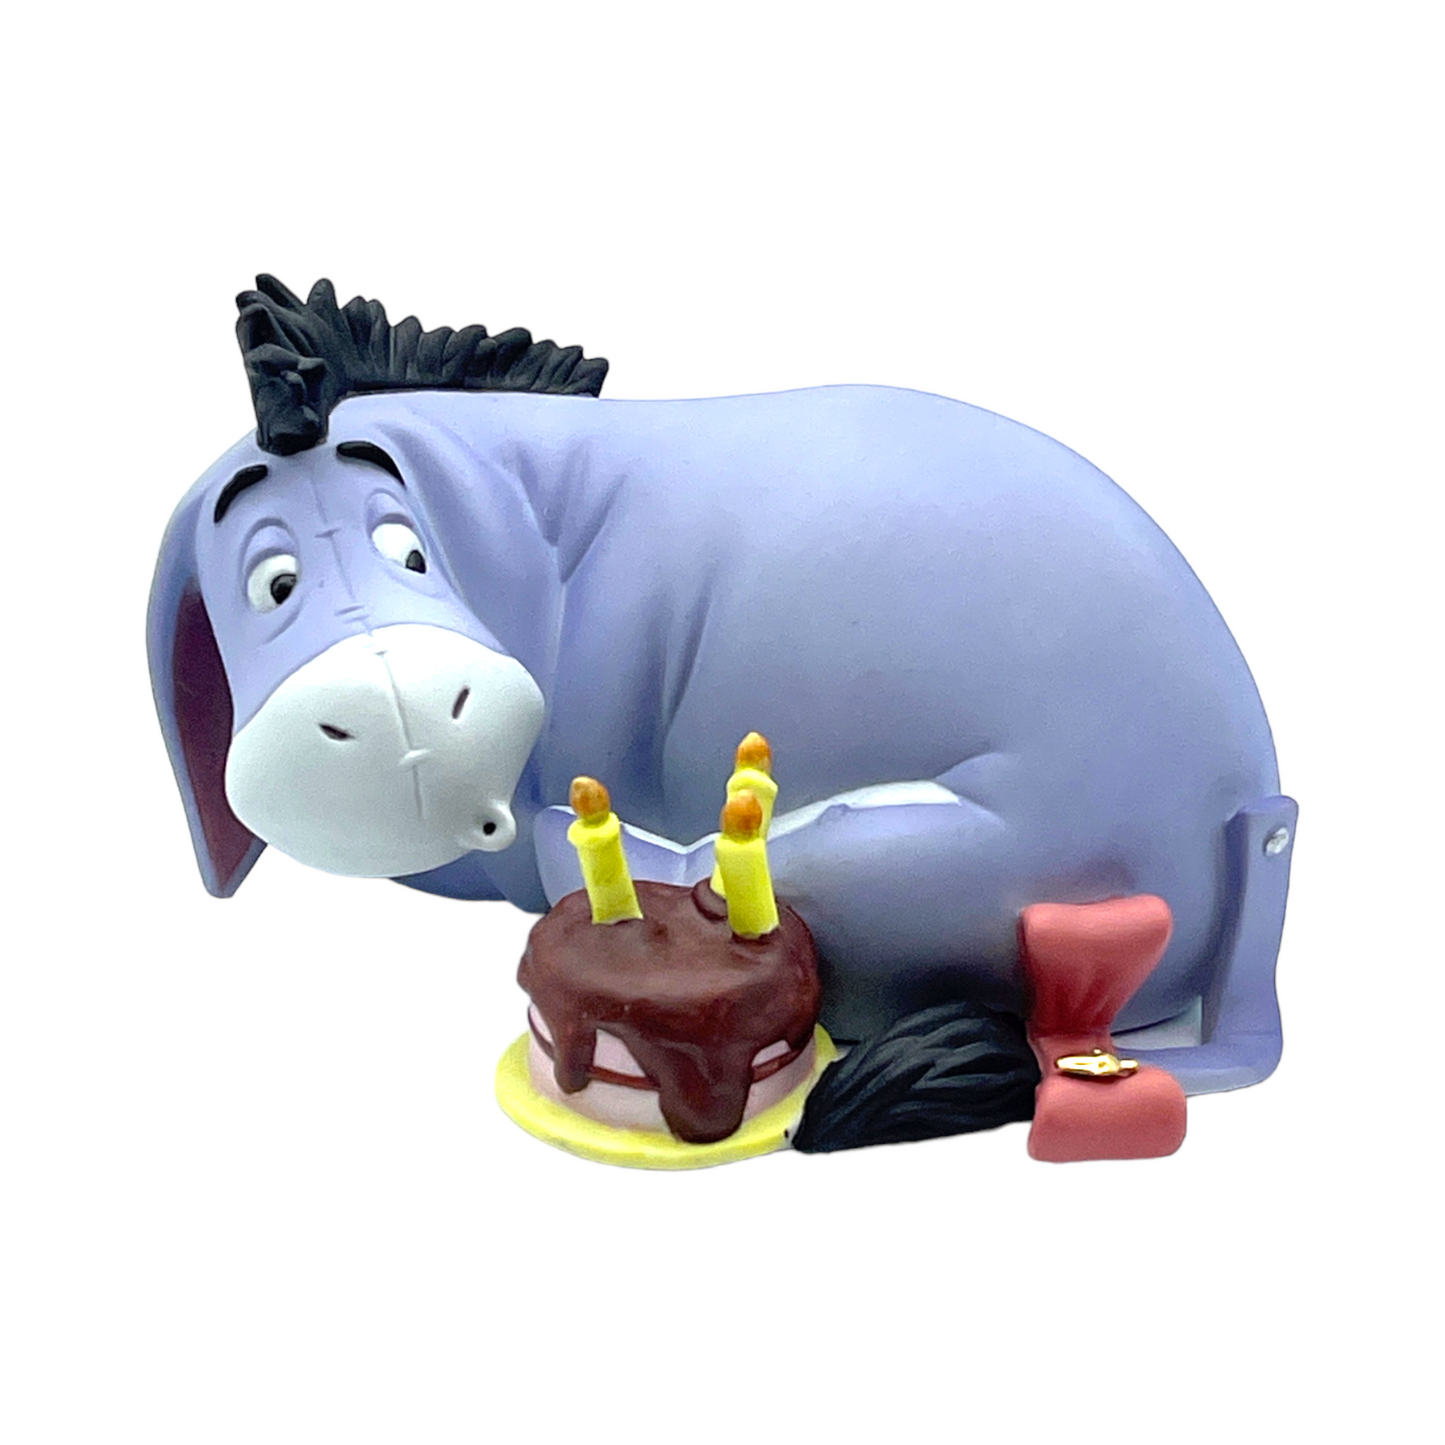 Pooh & Friends - Eeyore Birthdays They Come, They Go, They Come Again Figurine - With Box - 2.5"